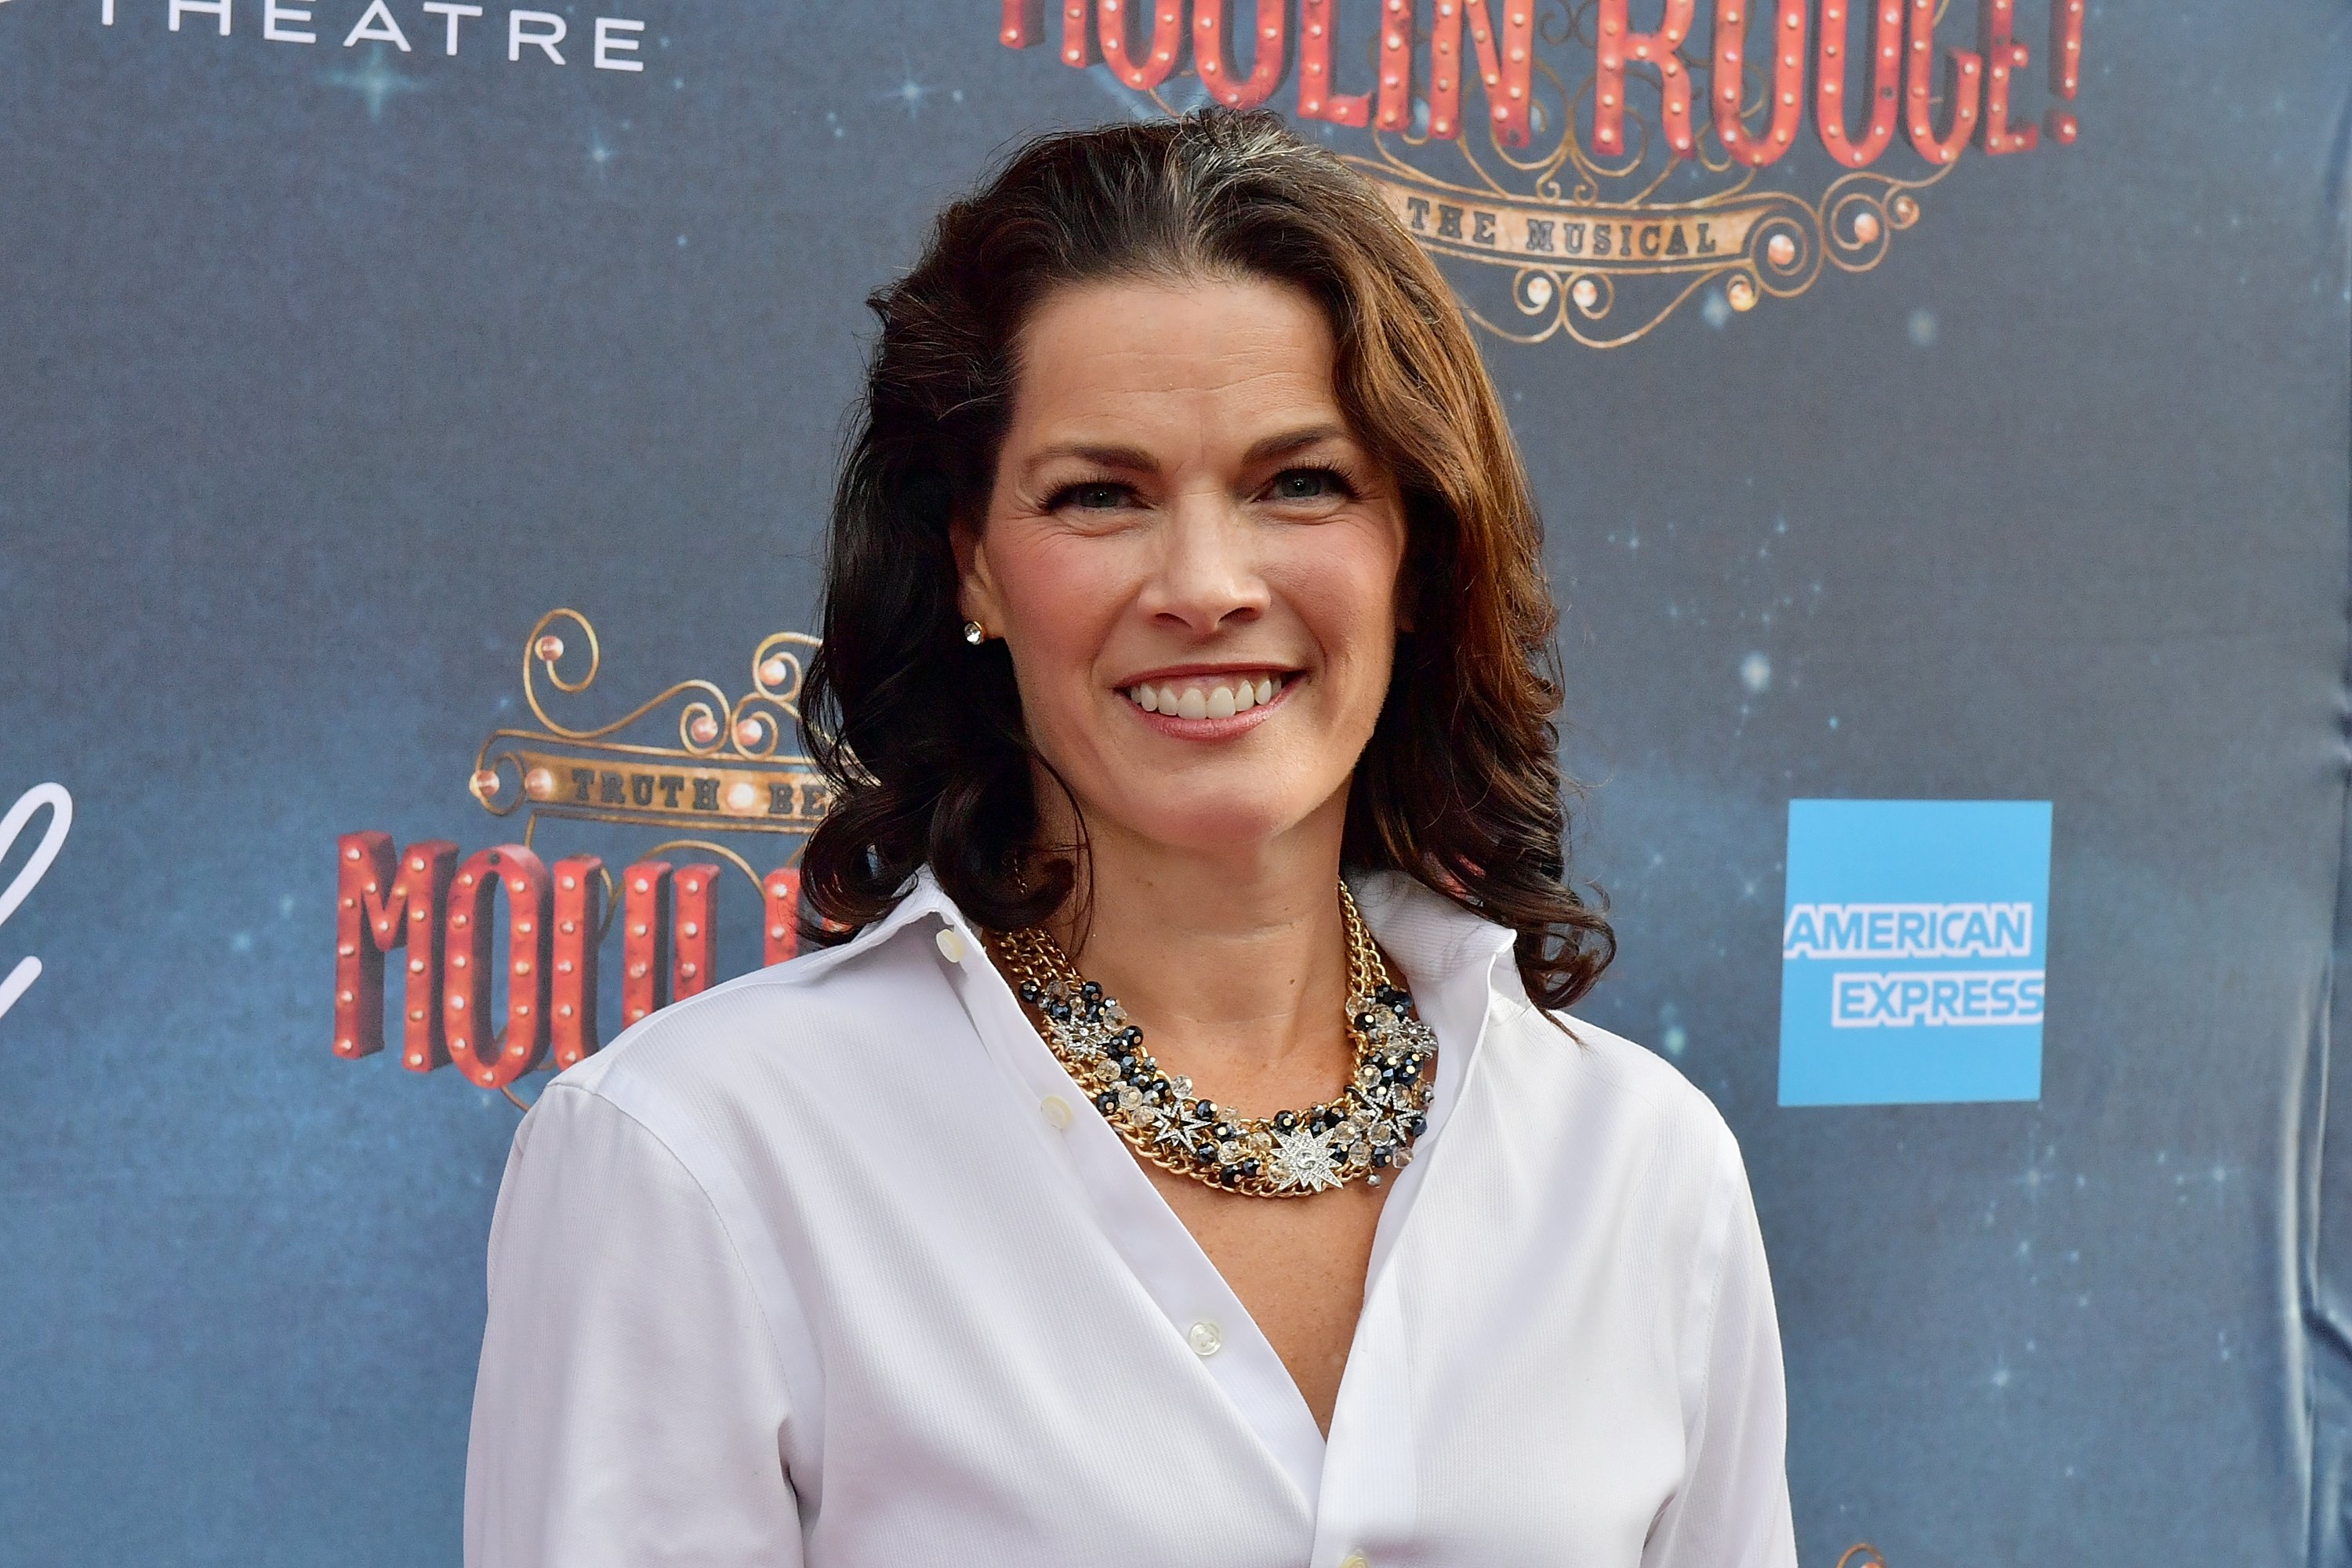 Nancy Kerrigan at Emerson Colonial Theatre on July 29, 2018, in Boston, Massachusetts. | Source: Getty Images